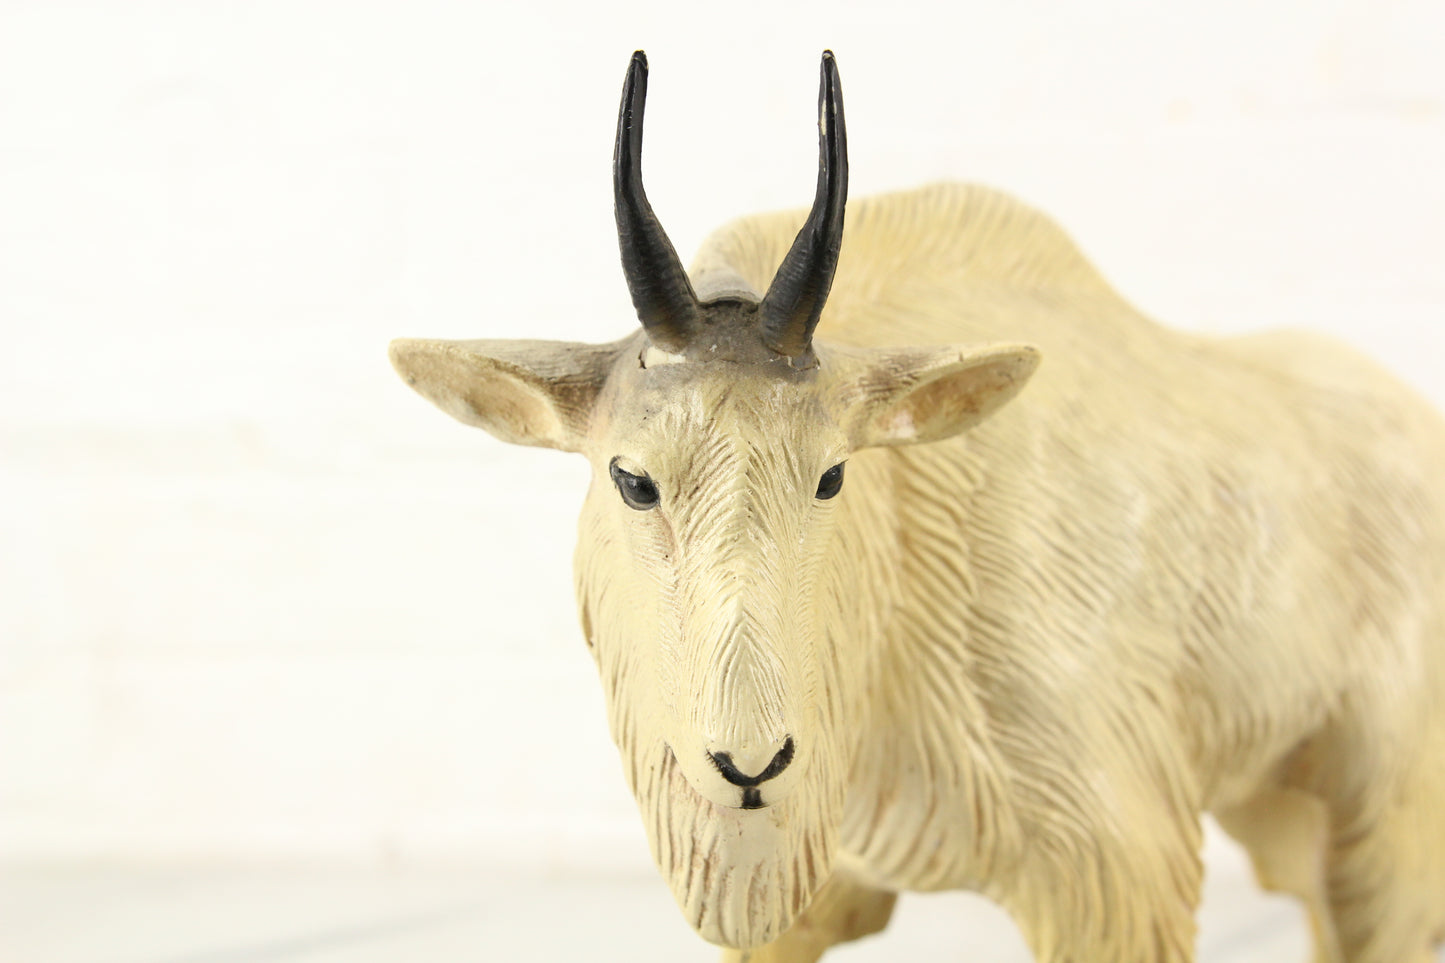 Chalkware Rocky Mountain Goat Statue, An Orn-A-Craft Product, 1947